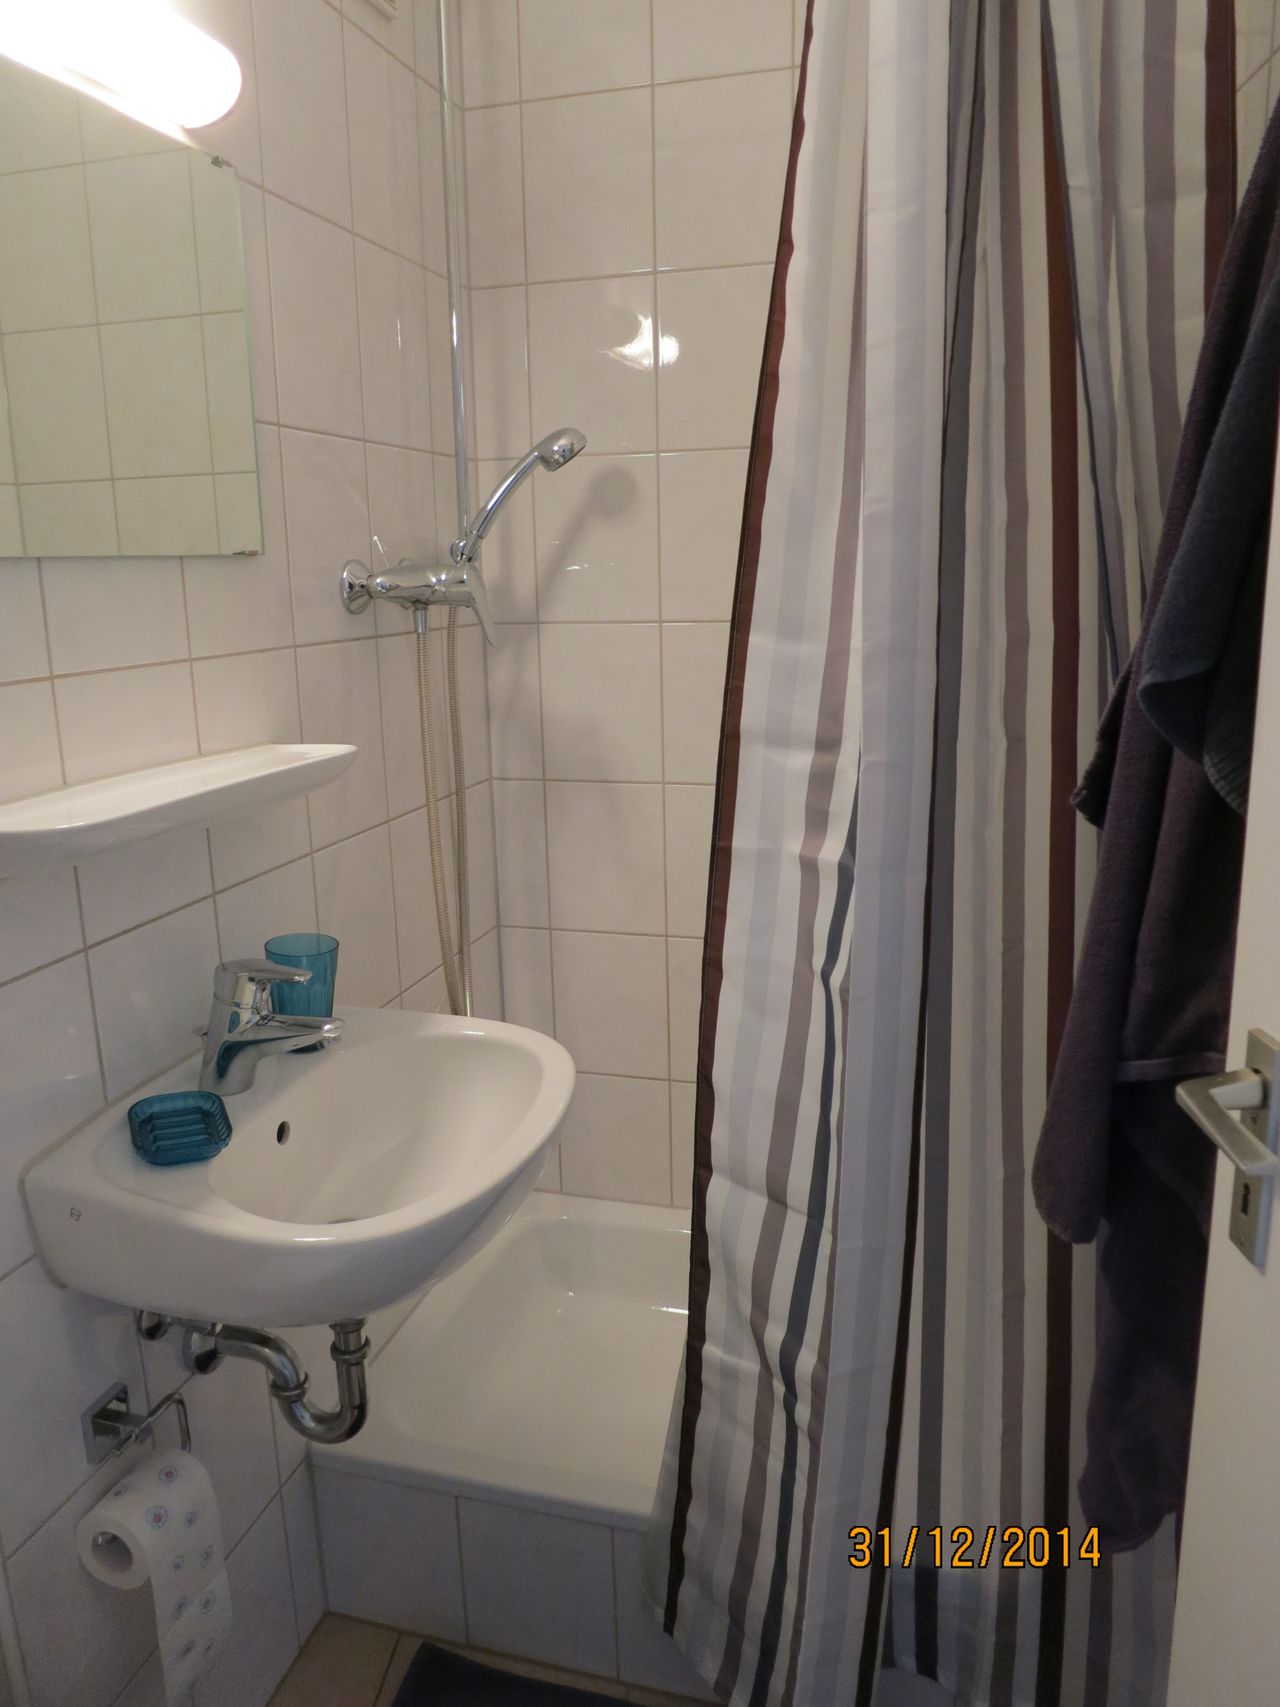 Beautiful 2 room flat, all inclusive with perfect transport connections